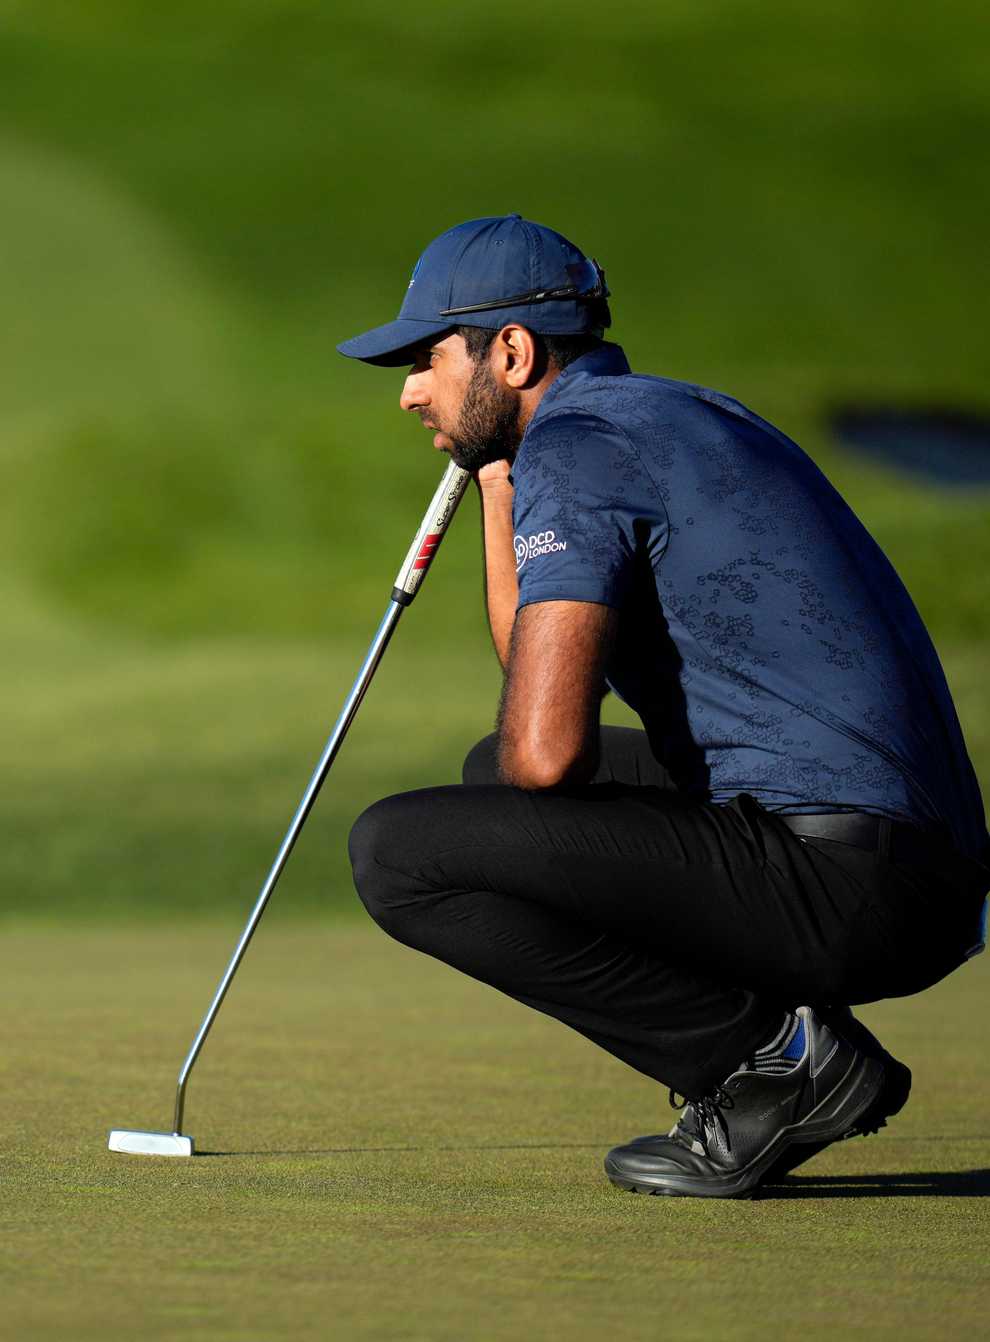 England’s Aaron Rai shot 8-under 64 at Torrey Pines to tie for the first-round lead with Americans Sam Ryder and Brent Grant at the Farmers Insurance Open (Gregory Bull/AP)